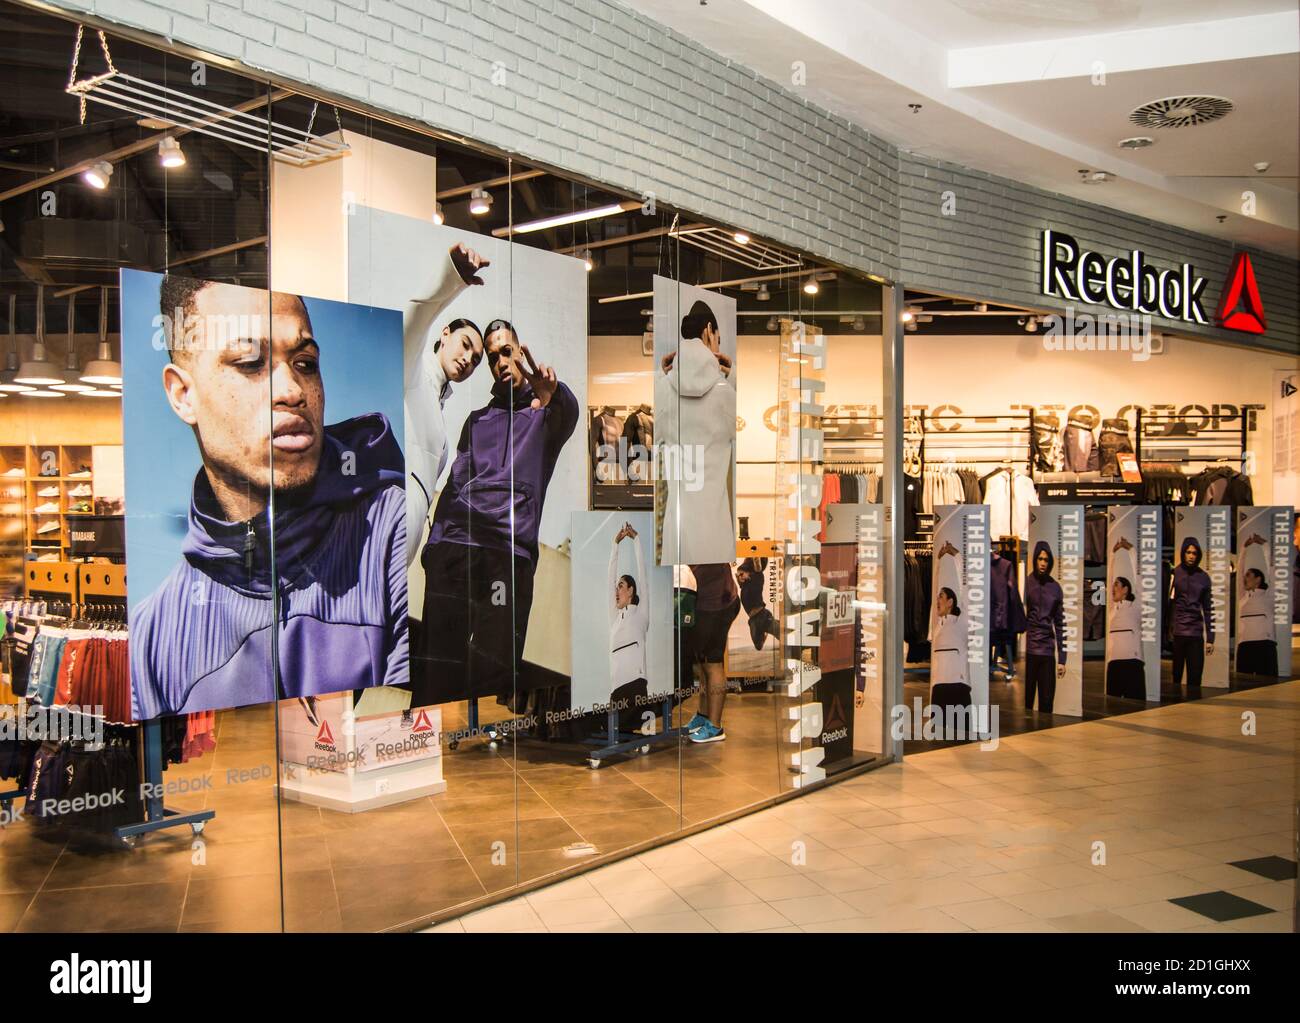 Moscow, Russia - October 8, 2019: Reebok brand store in the Europolis ...